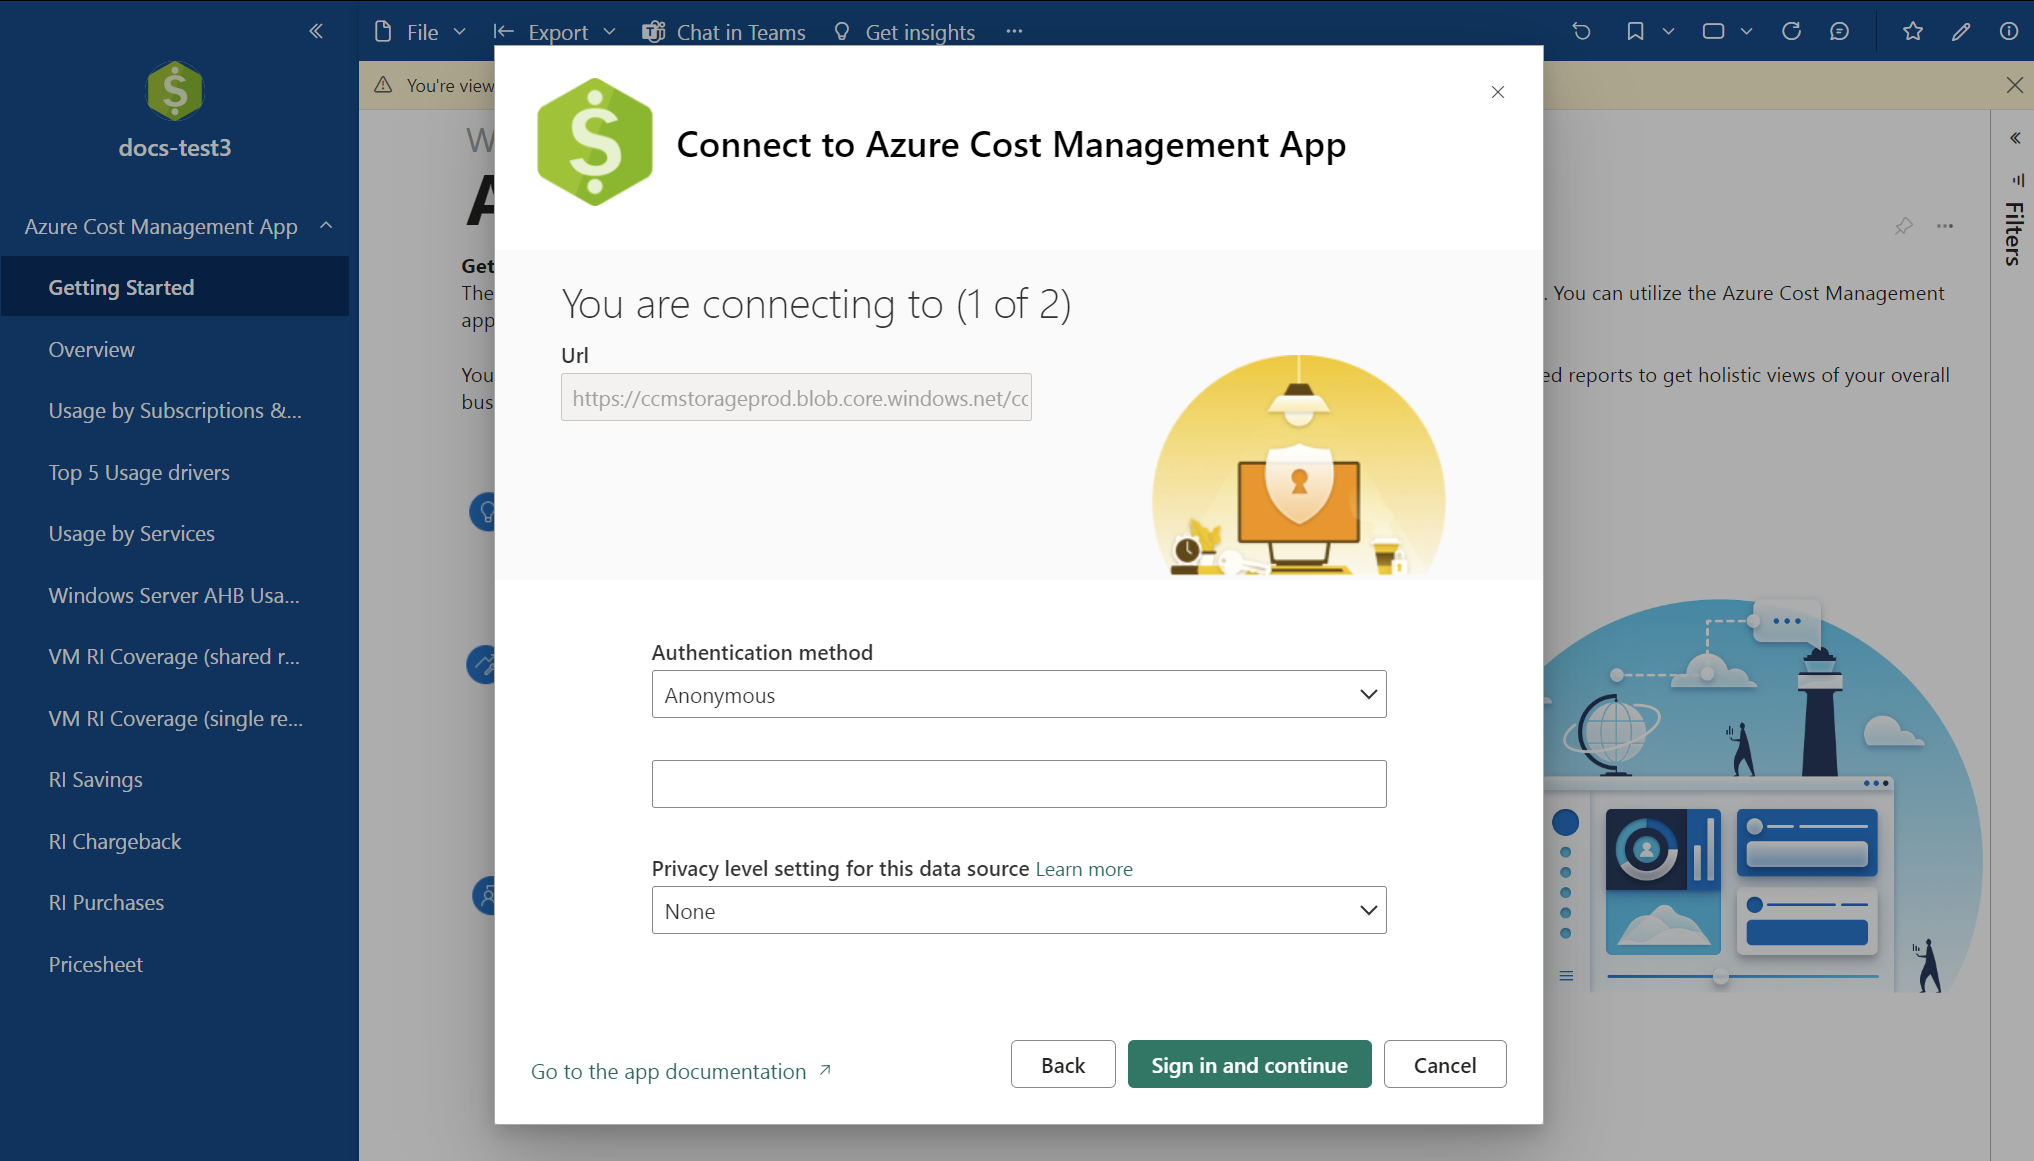 Screenshot showing the Connect to Cost Management App dialog box with default values to connect with.